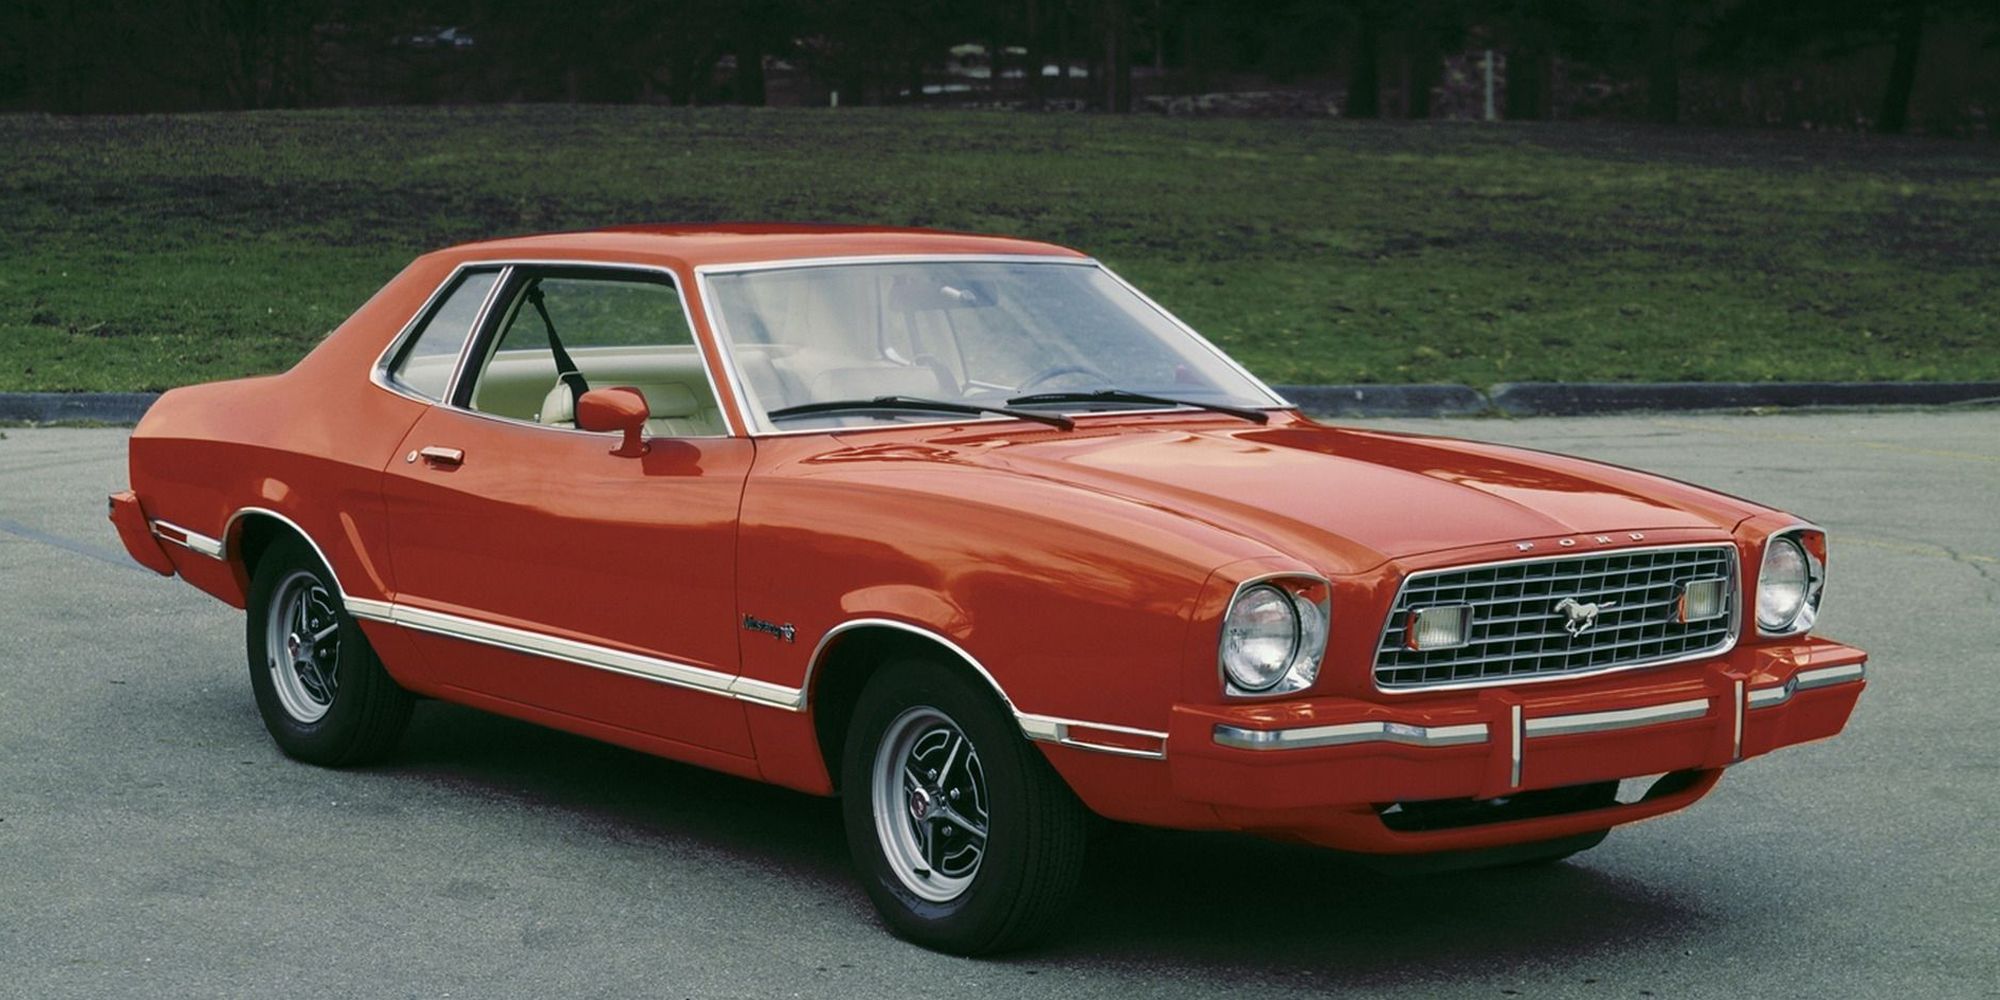 A red Mustang II